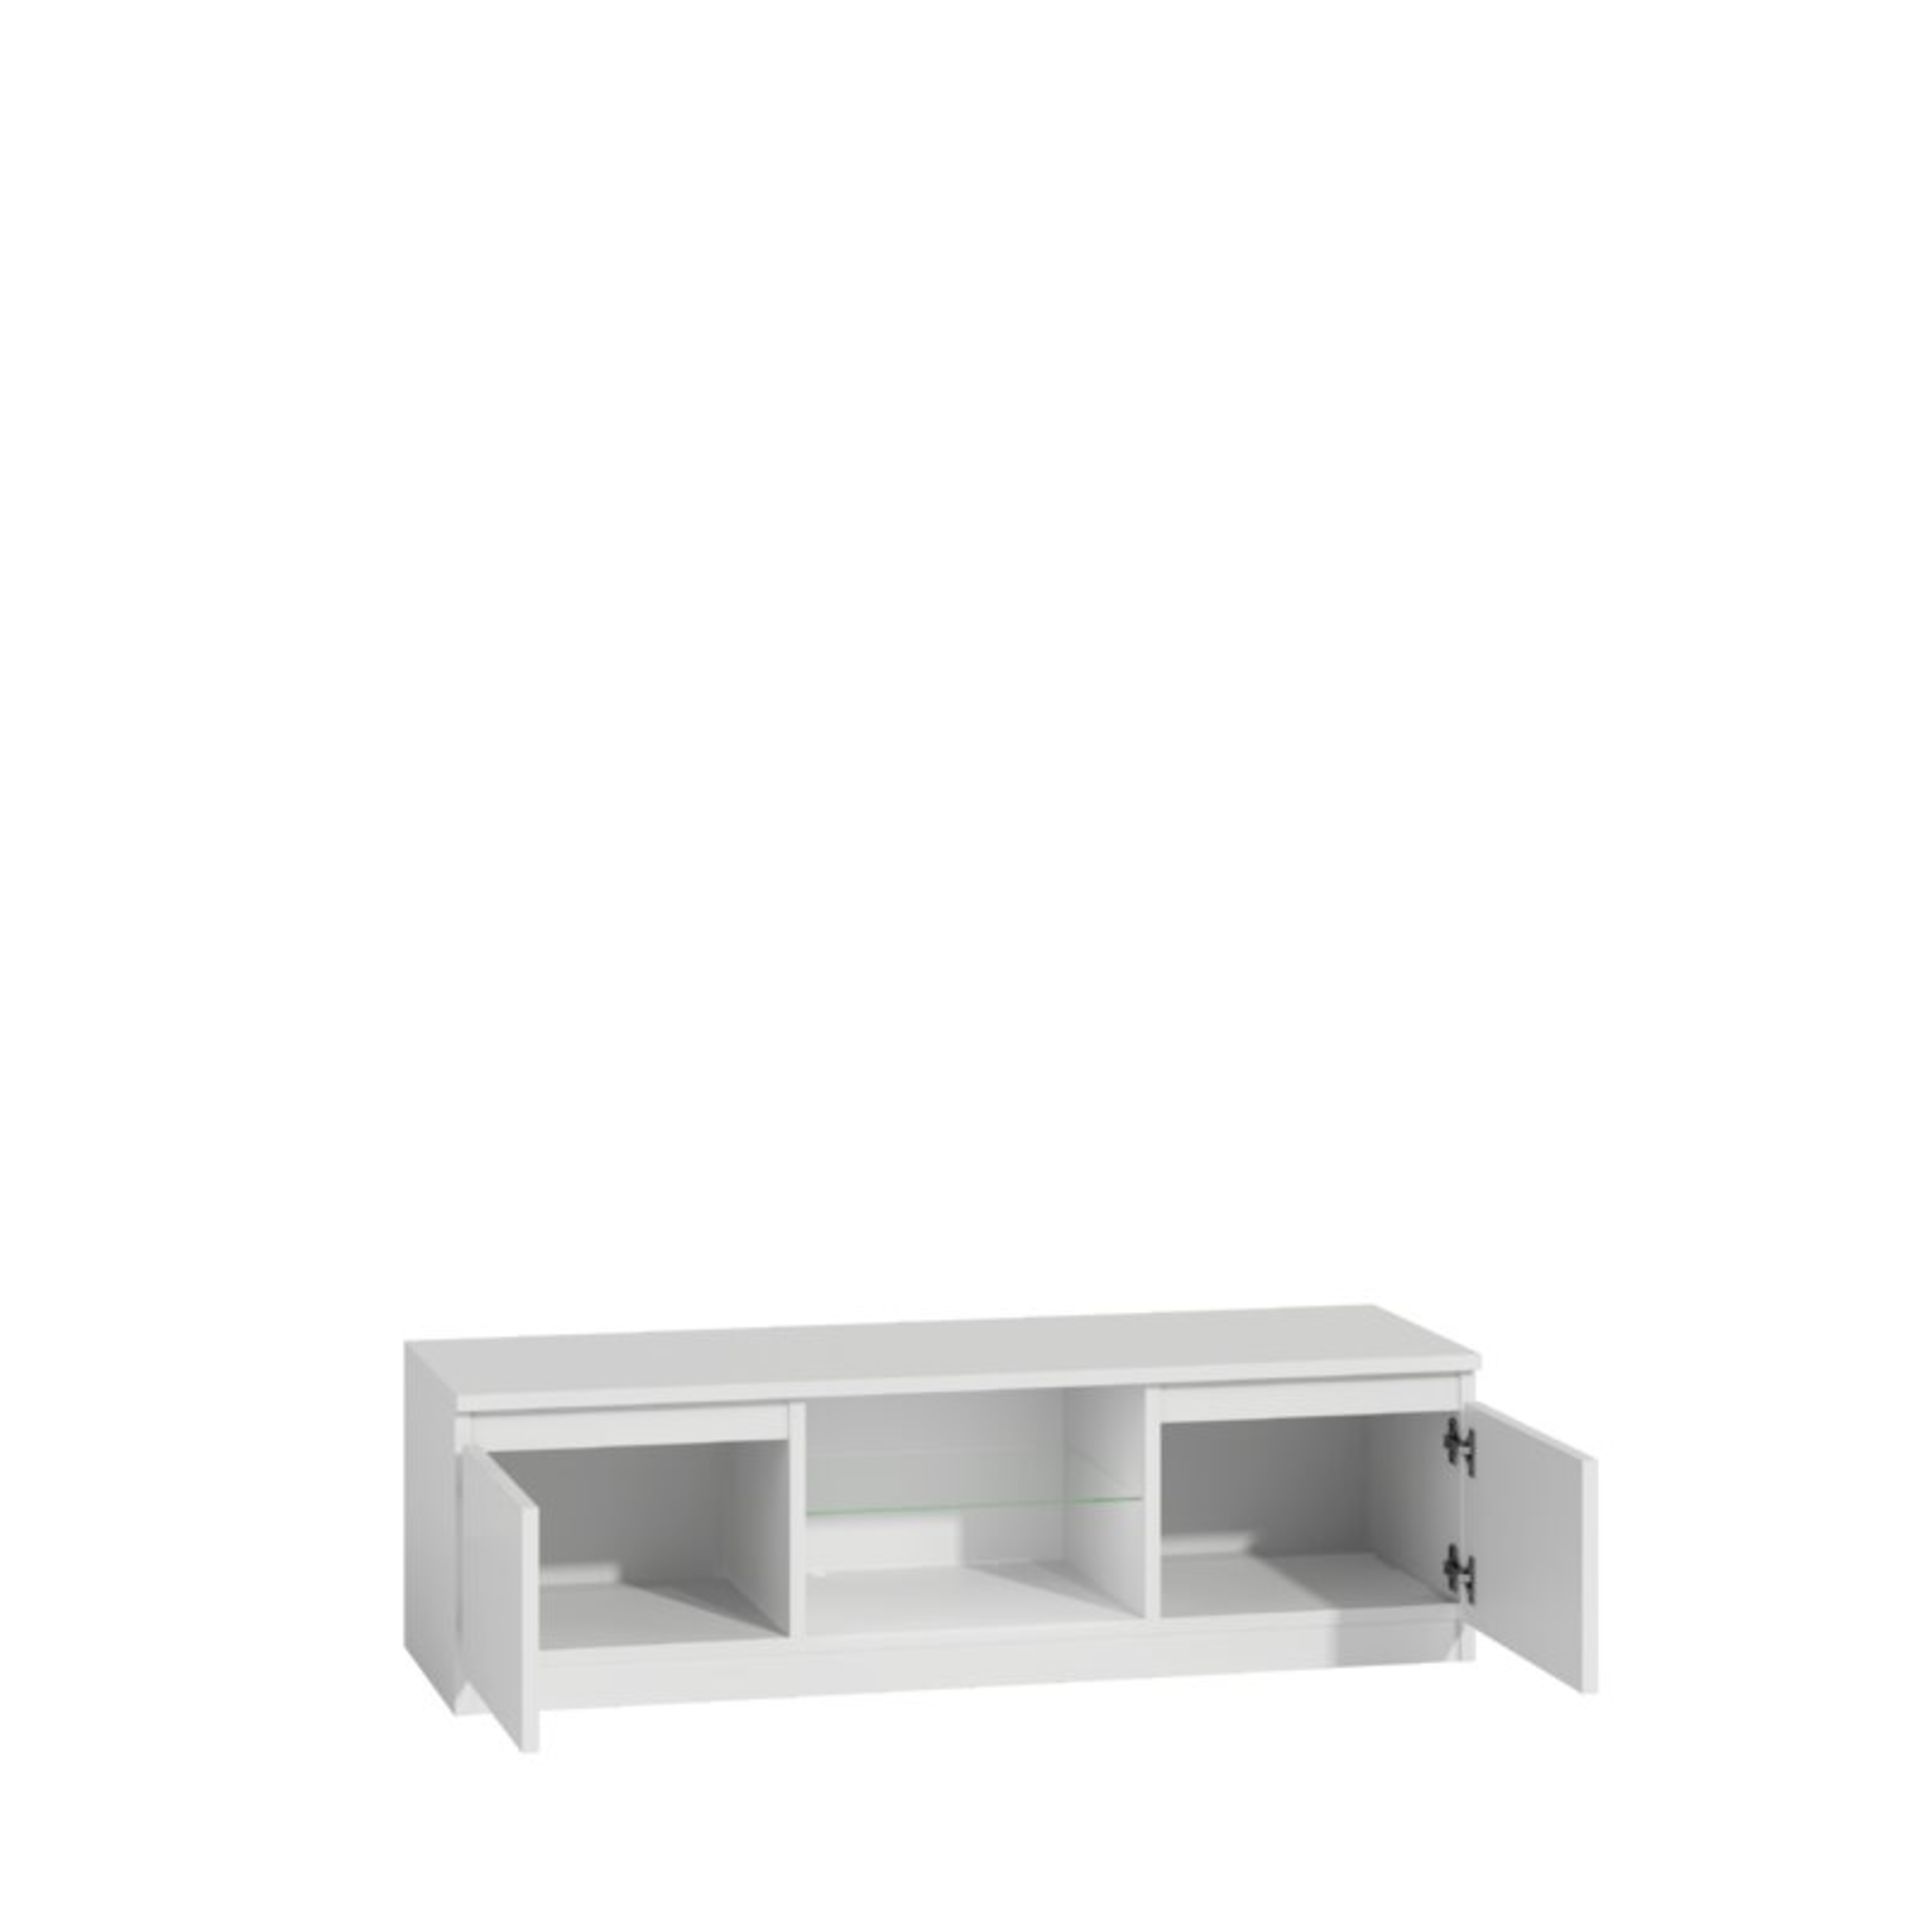 Ordonez TV Stand for TVs up to 58" White - RRP £173.99